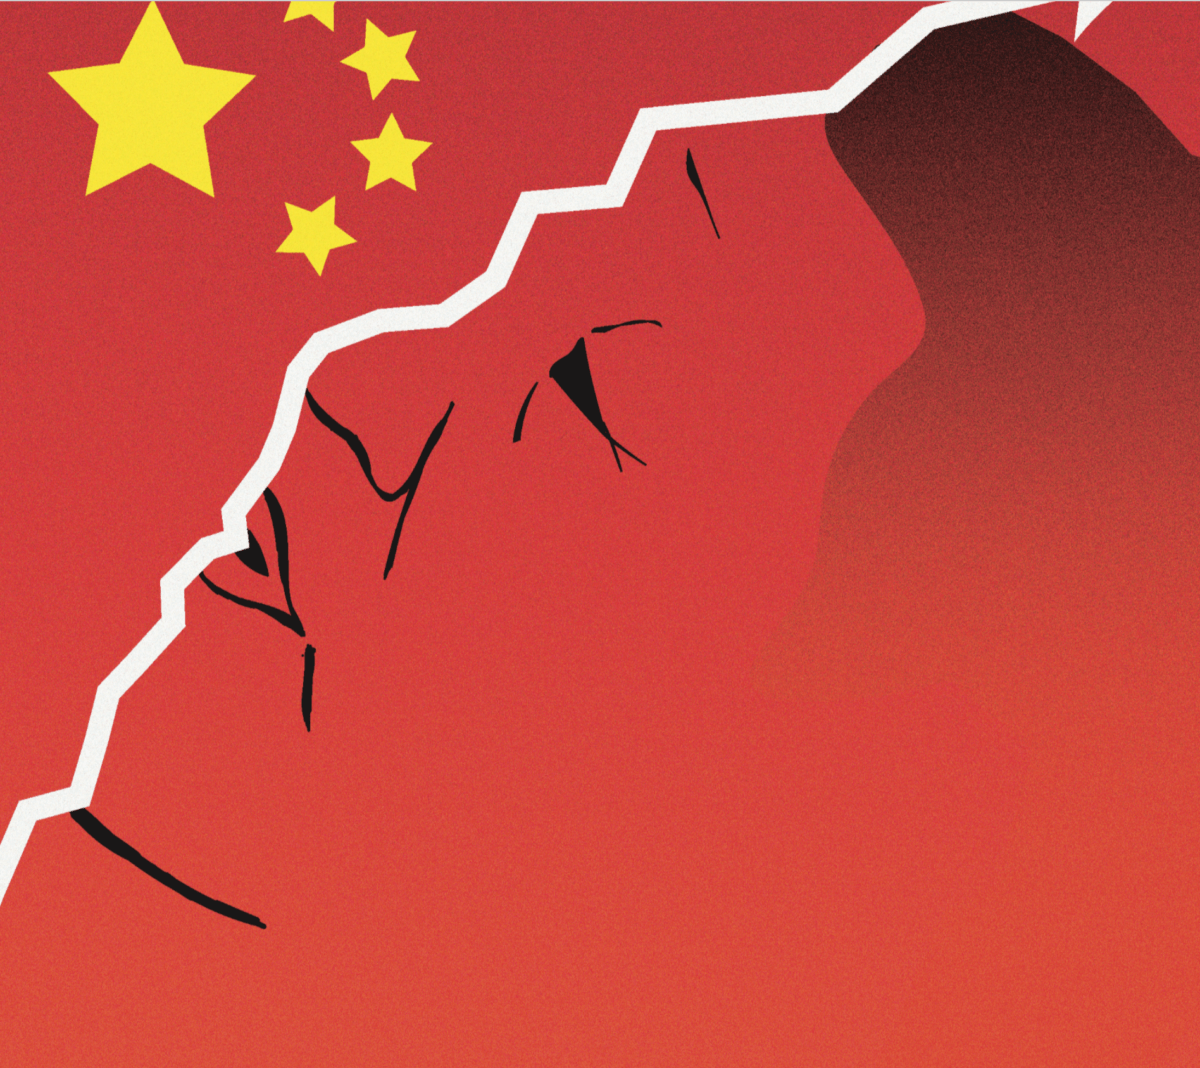 The Chinese red flag superimposed upon and image of Xi Jinping's face